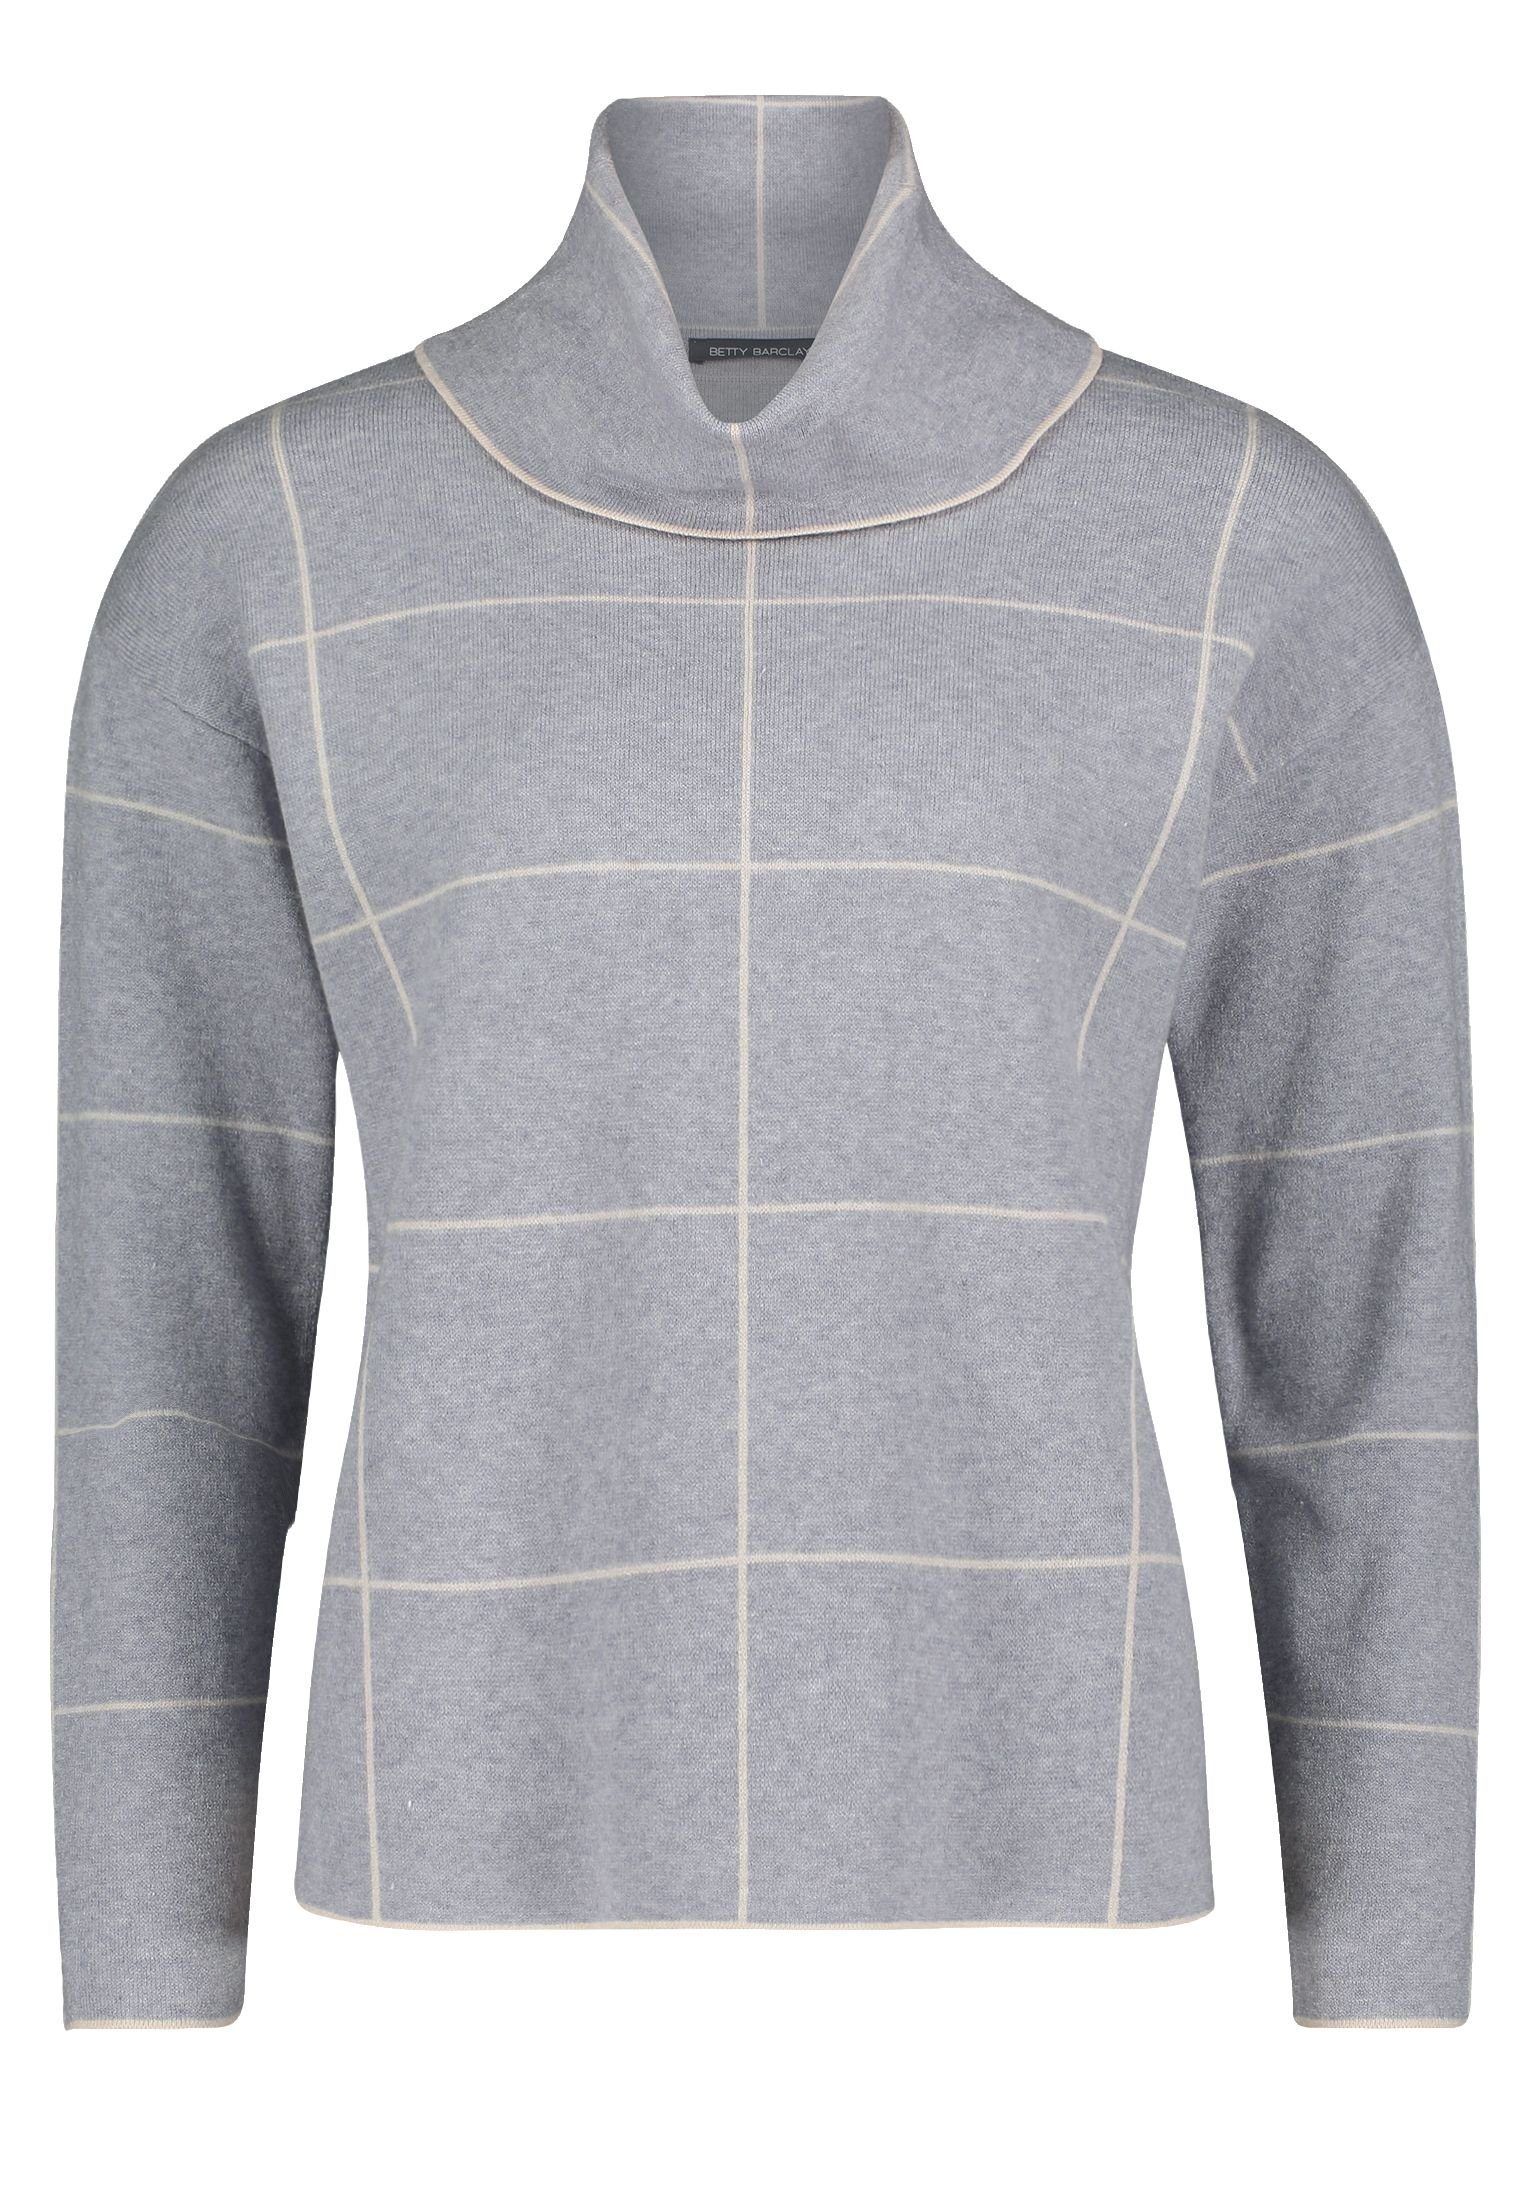 Barclay Strickpullover grey/beige patch Betty